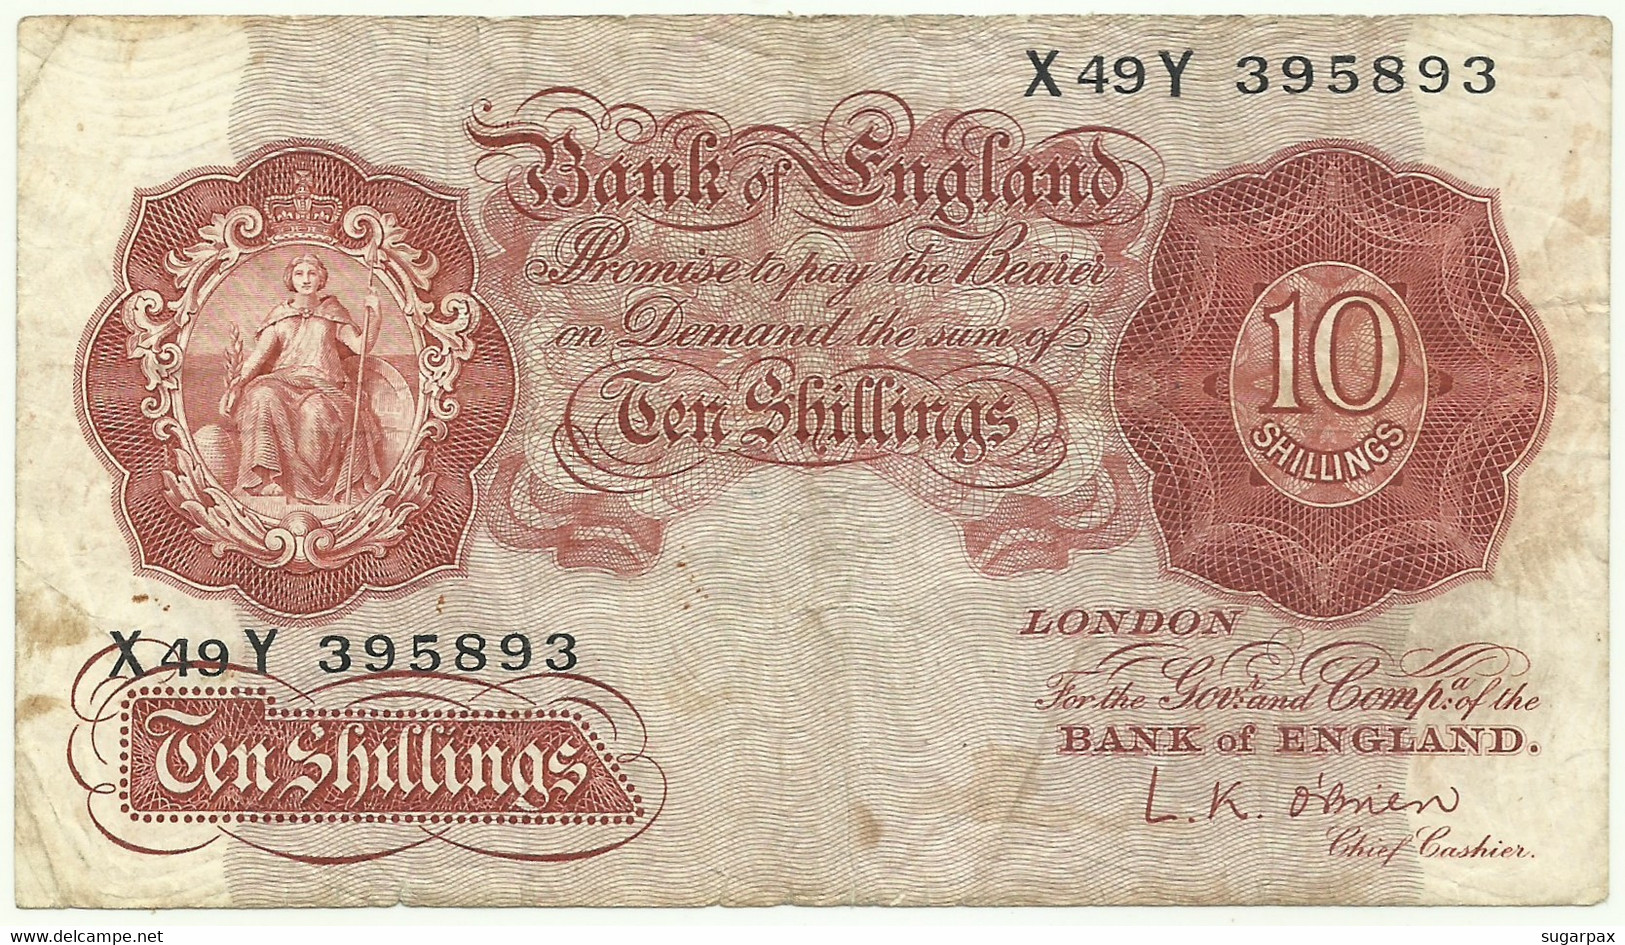 Great Britain - 10 Shillings - ND ( 1955 - 1960 ) - Pick 368.c - Serie X 49 Y - England, United Kingdom - 10 Shillings